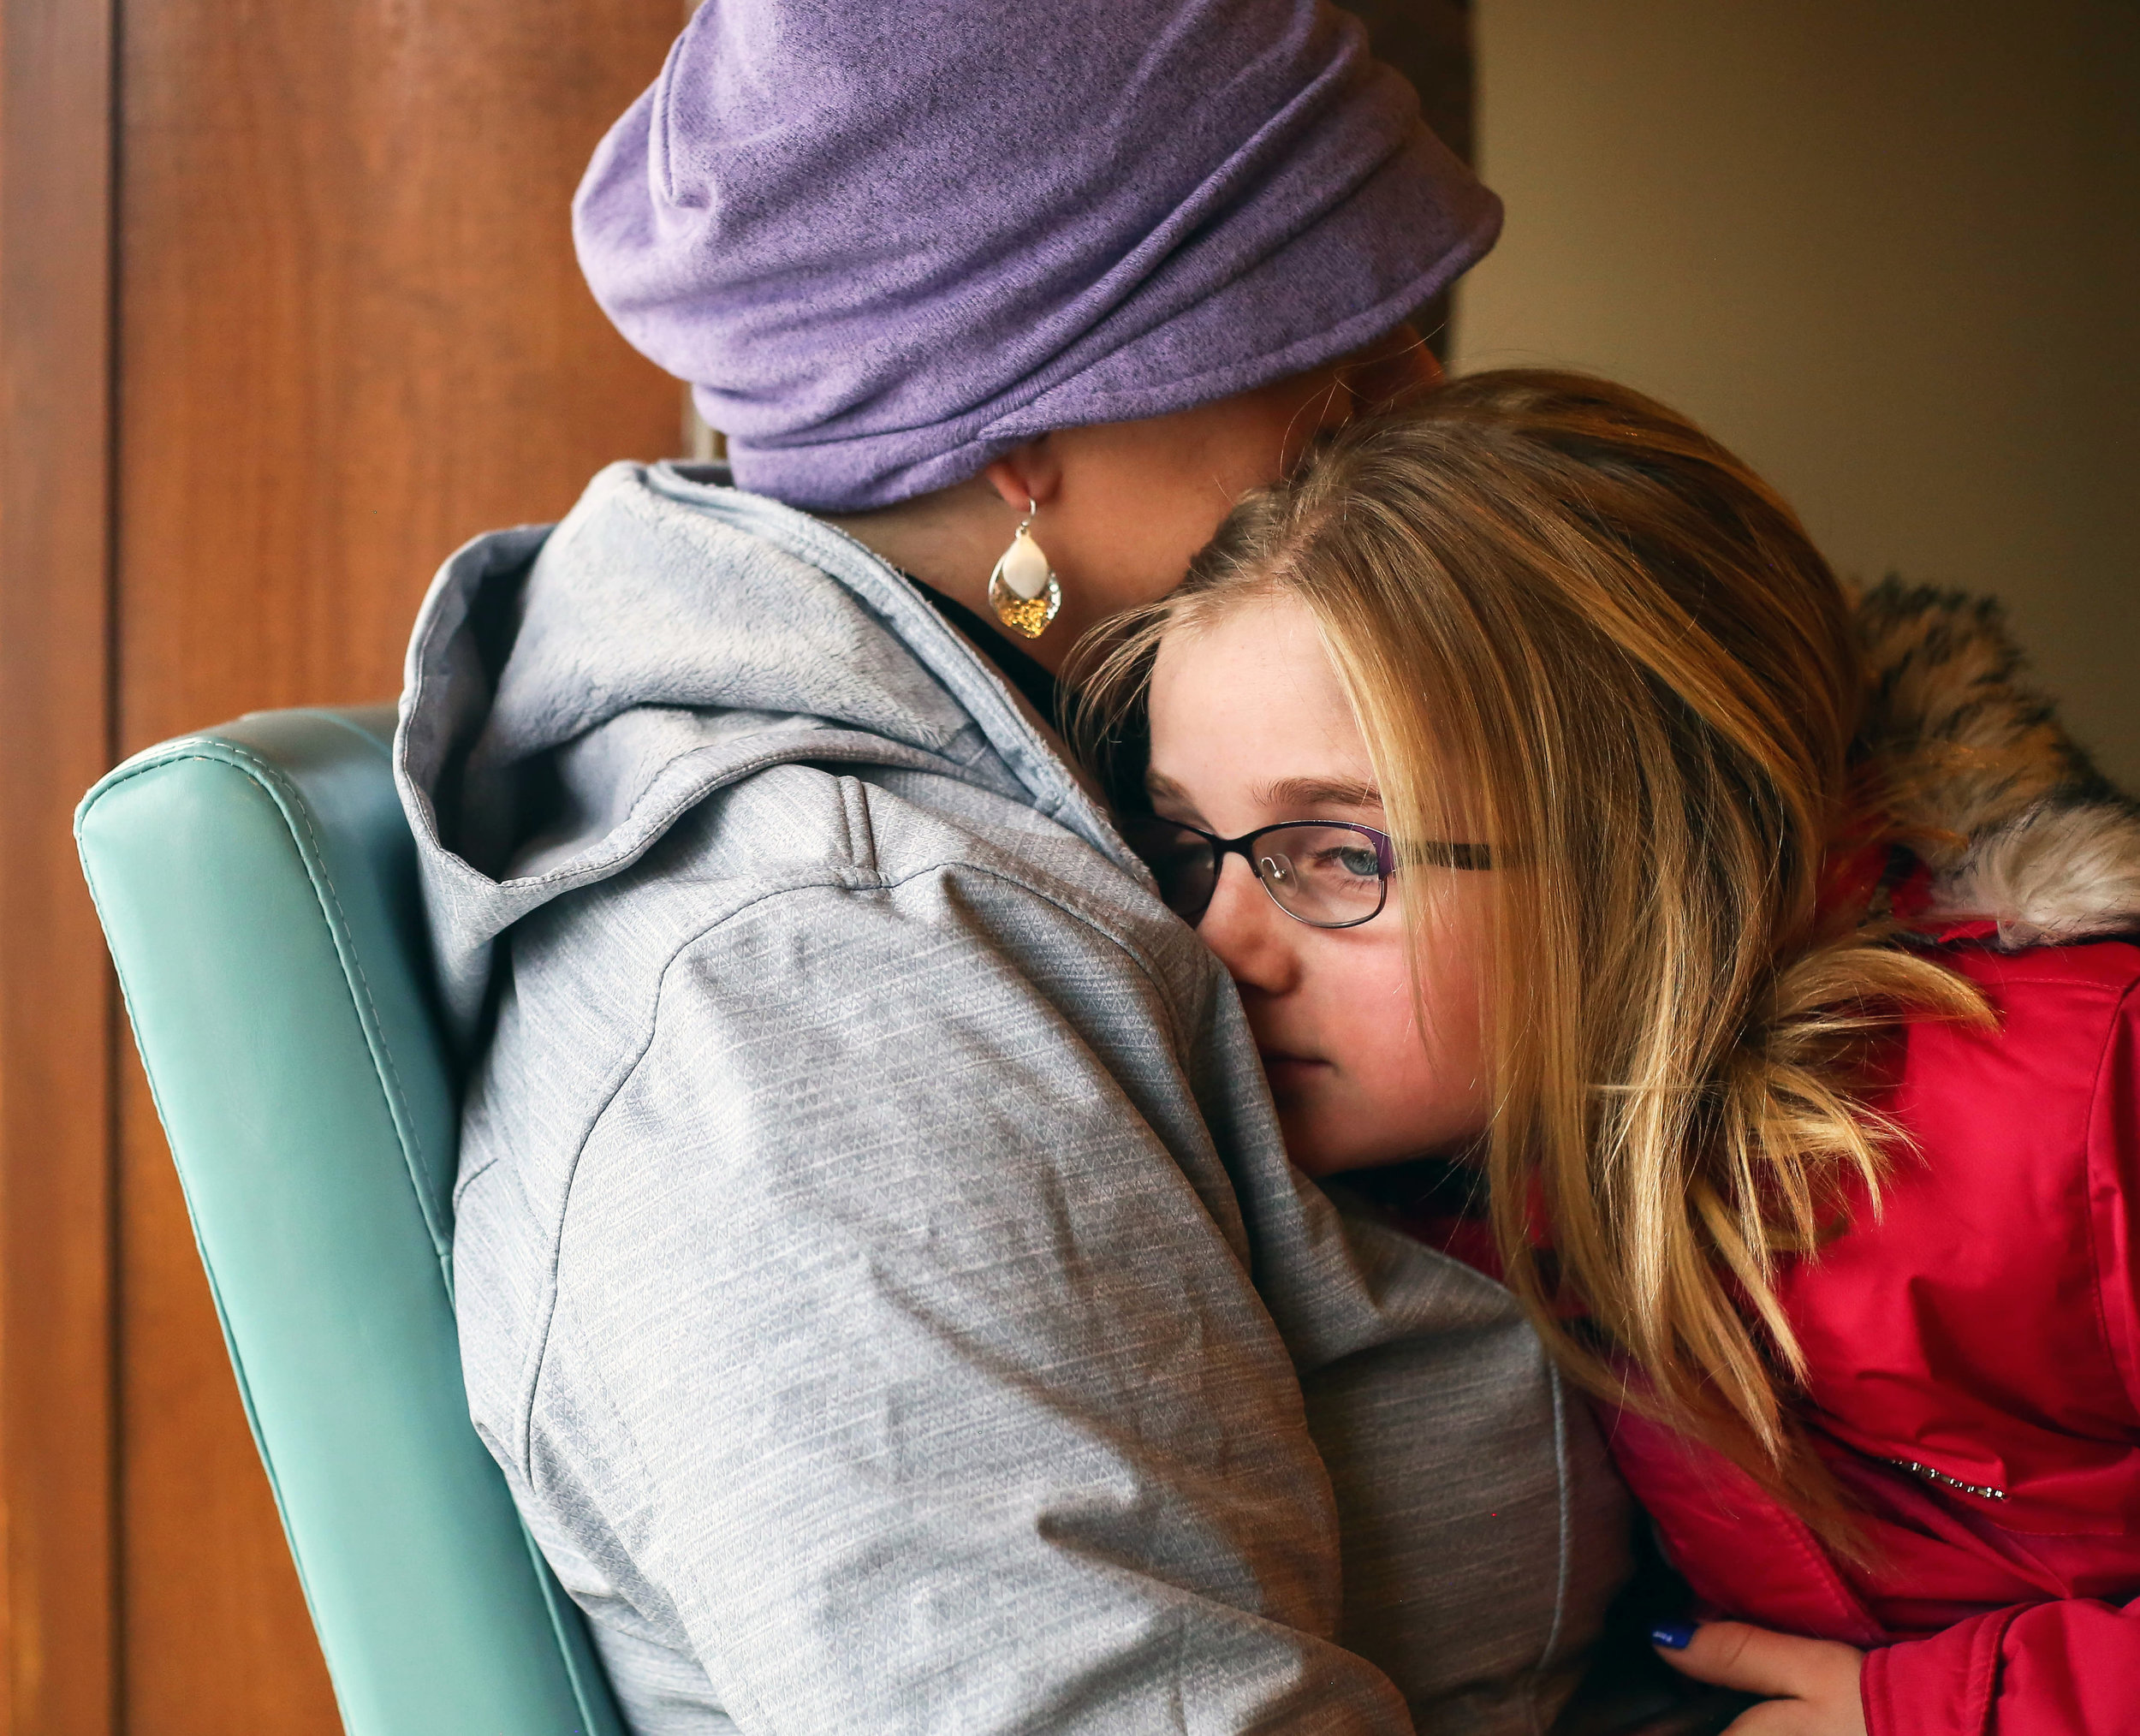  Amanda Cihak’s daughter Kayla leans into her while they wait to get her hair done at a salon, in Muskegon, Michigan on Saturday, Feb. 2, 2019. Amanda and her daughter share a strong bond. “We are very similar,” she said. “We’re both stubborn, perfec